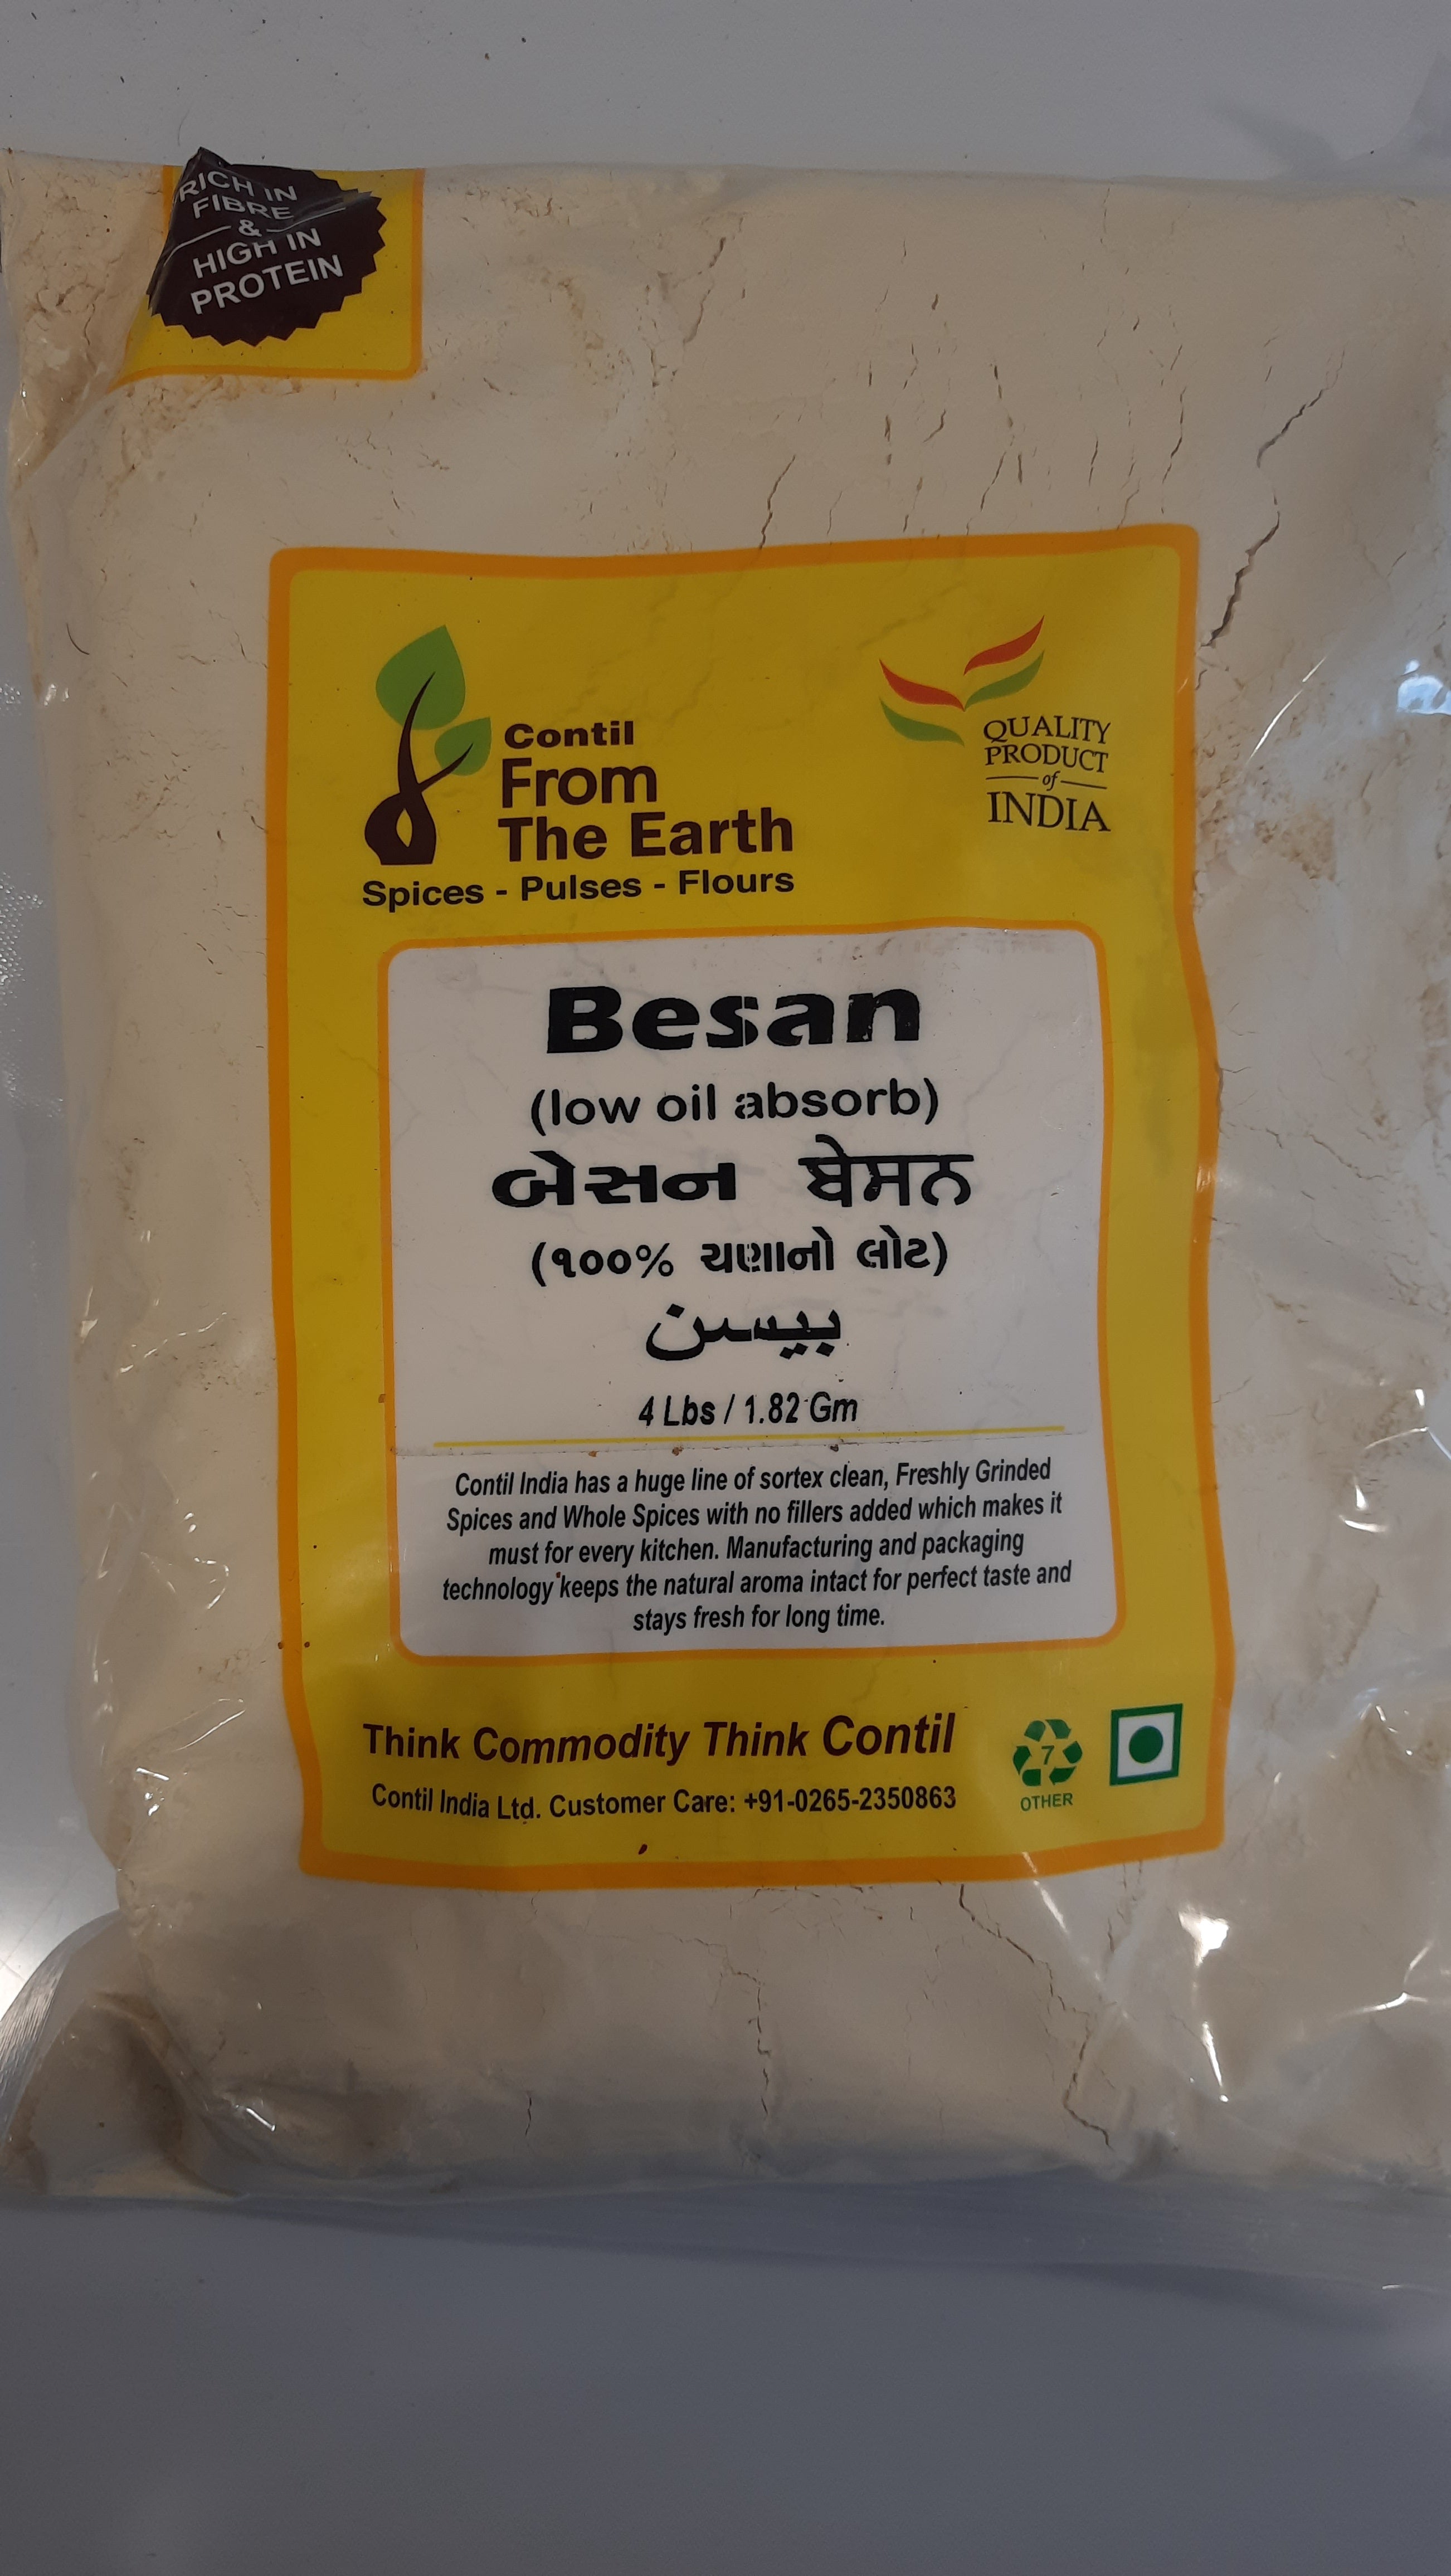 From the Earth - Besan Flour 4lb